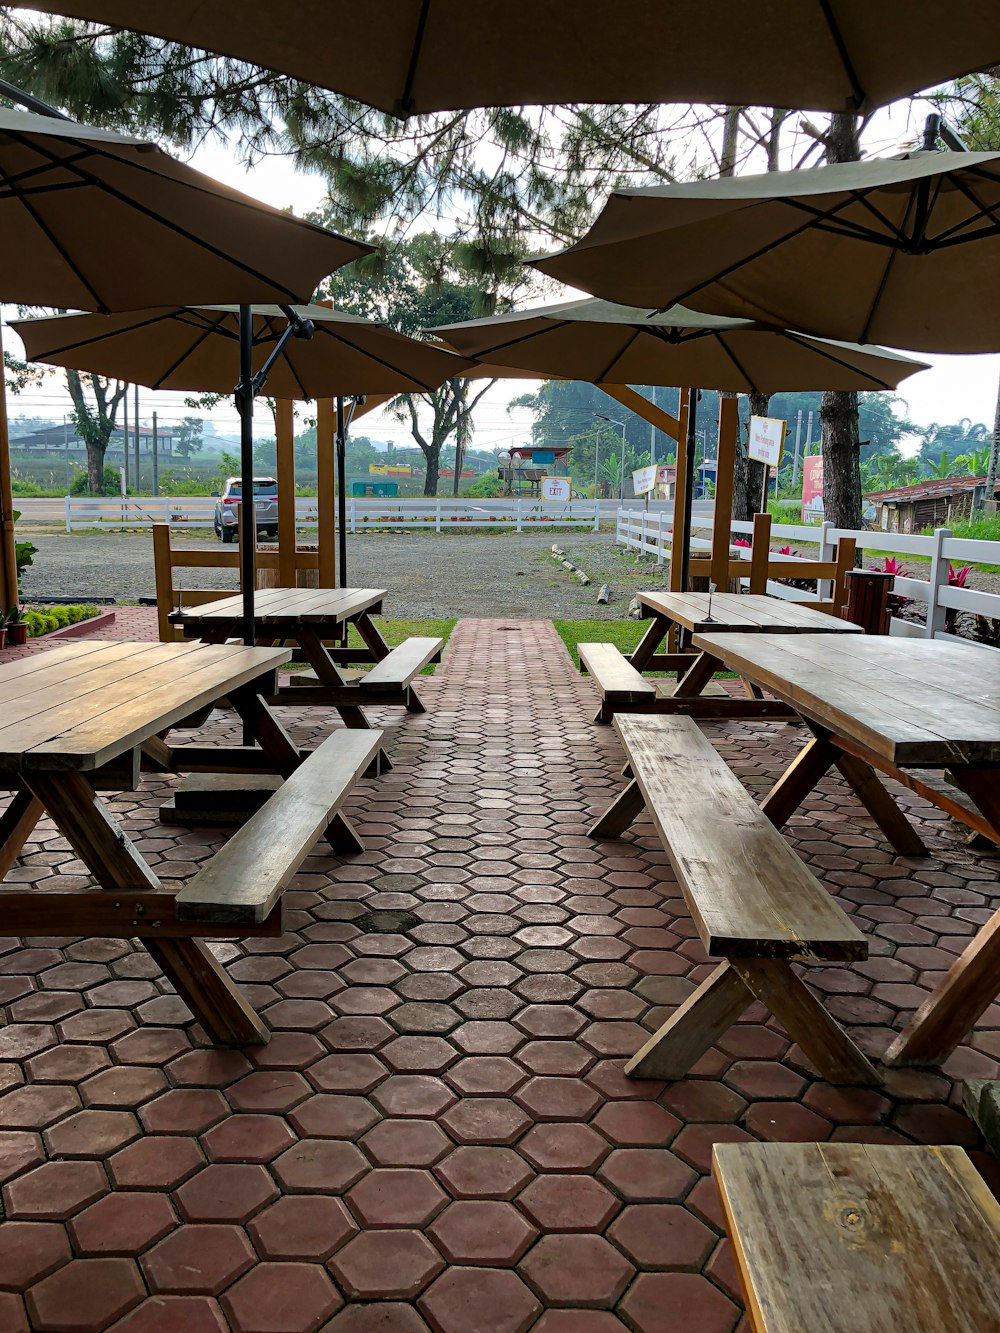 a picnic area with picnic tables and umbrellas